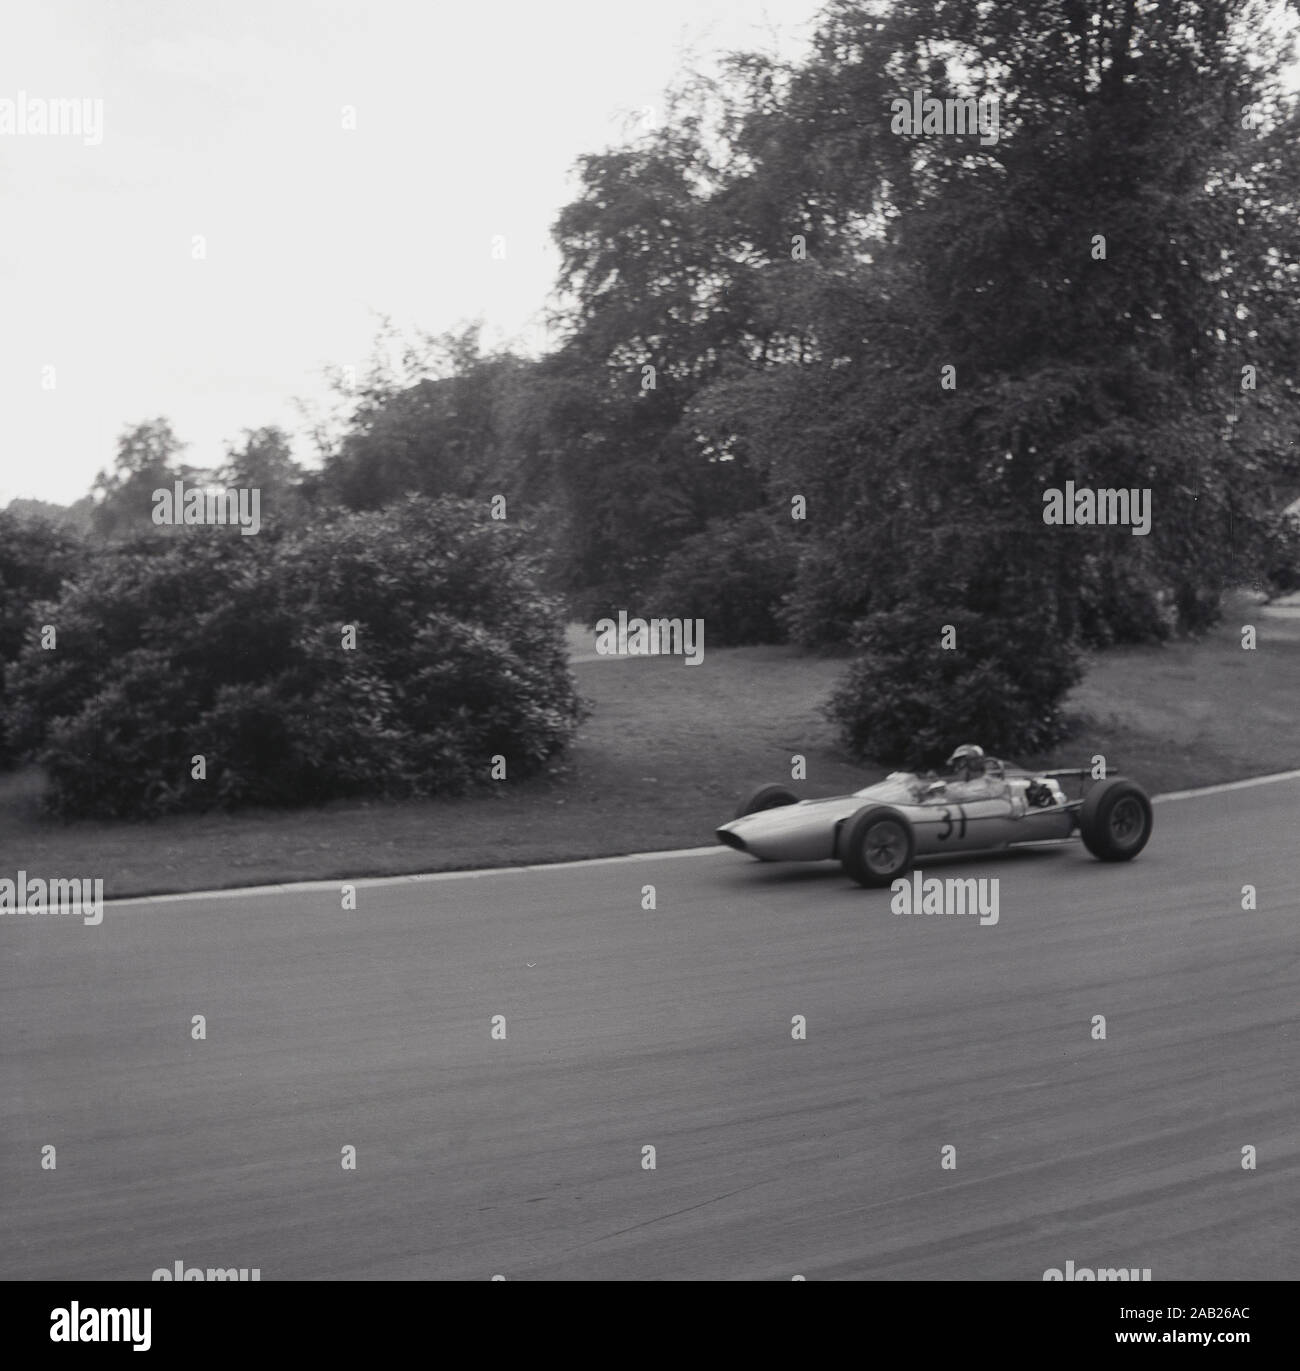 1960s, historical, motor racing at Crystal Palace race circuit in South London, London, England, UK, a racing car of the era going round a corner at the park circuit. Stock Photo